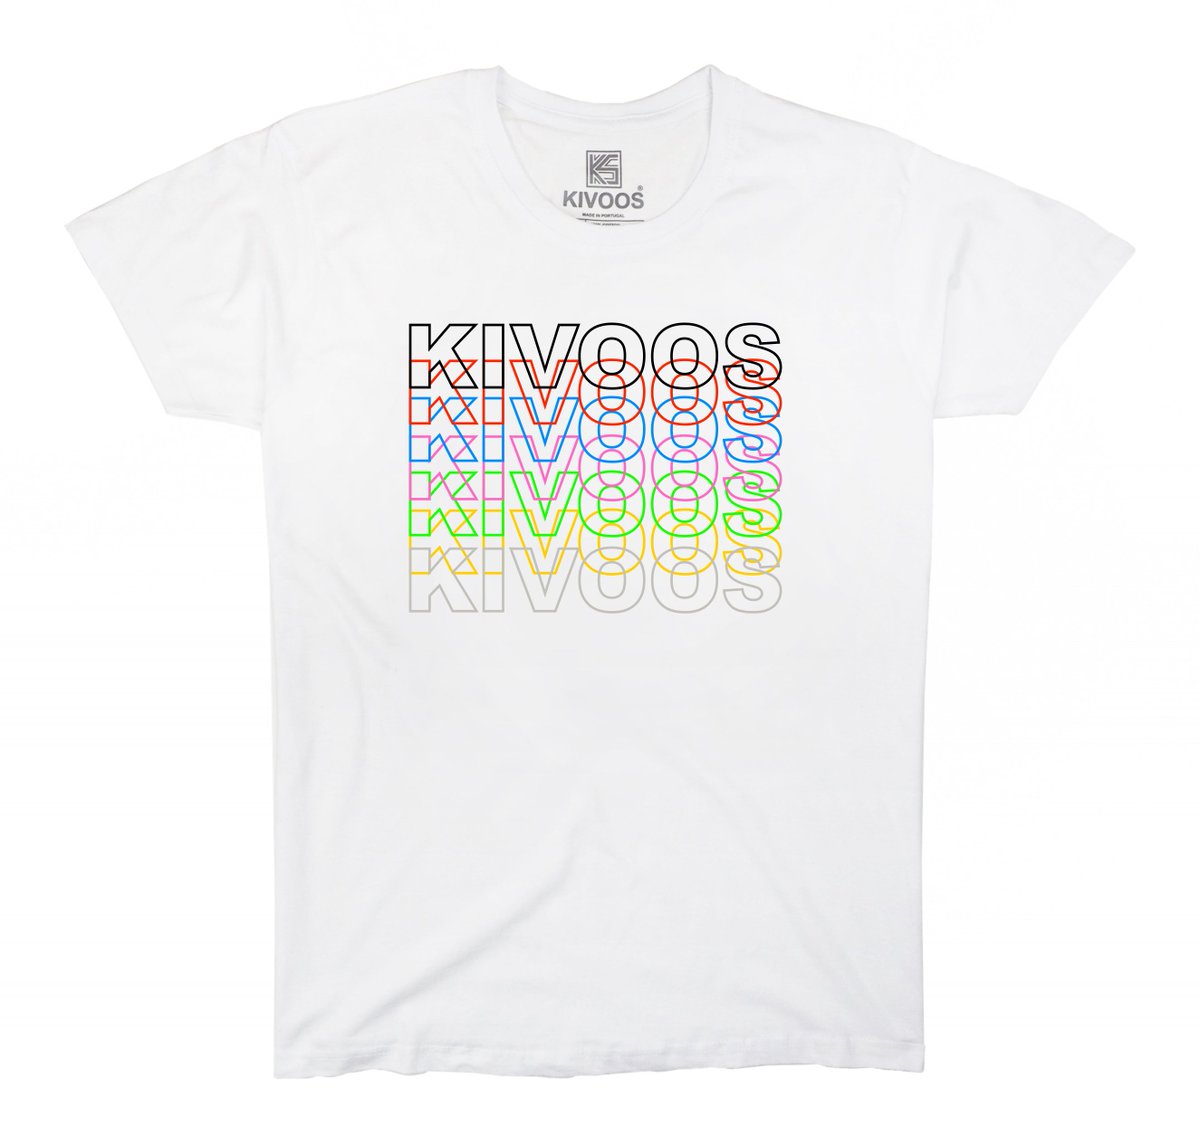 KIVOOS OUTLINE t-shirt
Dropping - March 8, 2021
Spring - Summer 2021 Collection
#streetstyle #clothes #clothing #streetfashion #hypebeast #hype #urbanstyle #hoodies #streetwearfashion #snobshots #urbanfashion #urbanwear #outfitsociety #simplefits #hypebeaststyle #hypebeastkicks